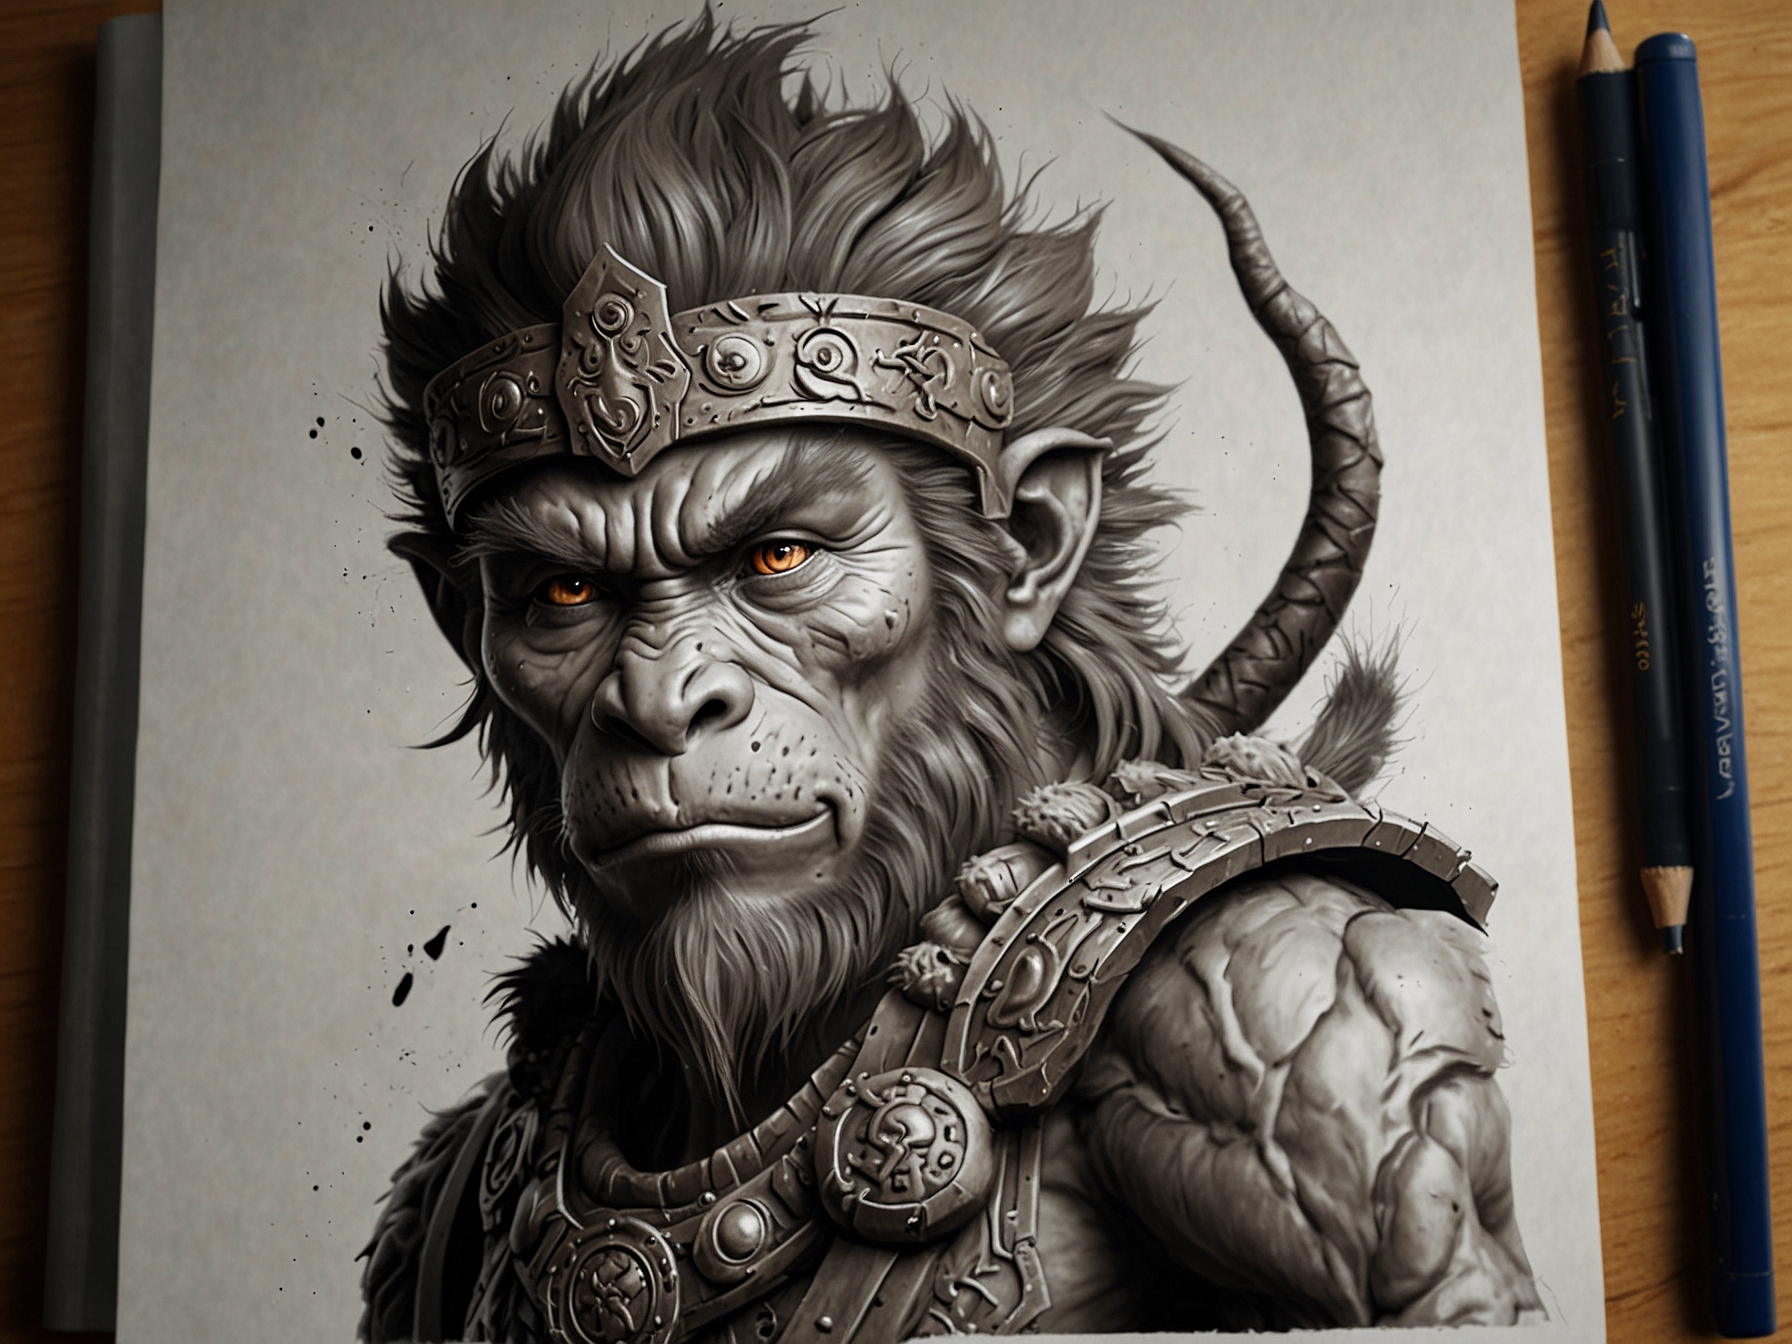 A close-up of Wukong’s beautifully detailed character model, highlighting the impressive graphics of the game.